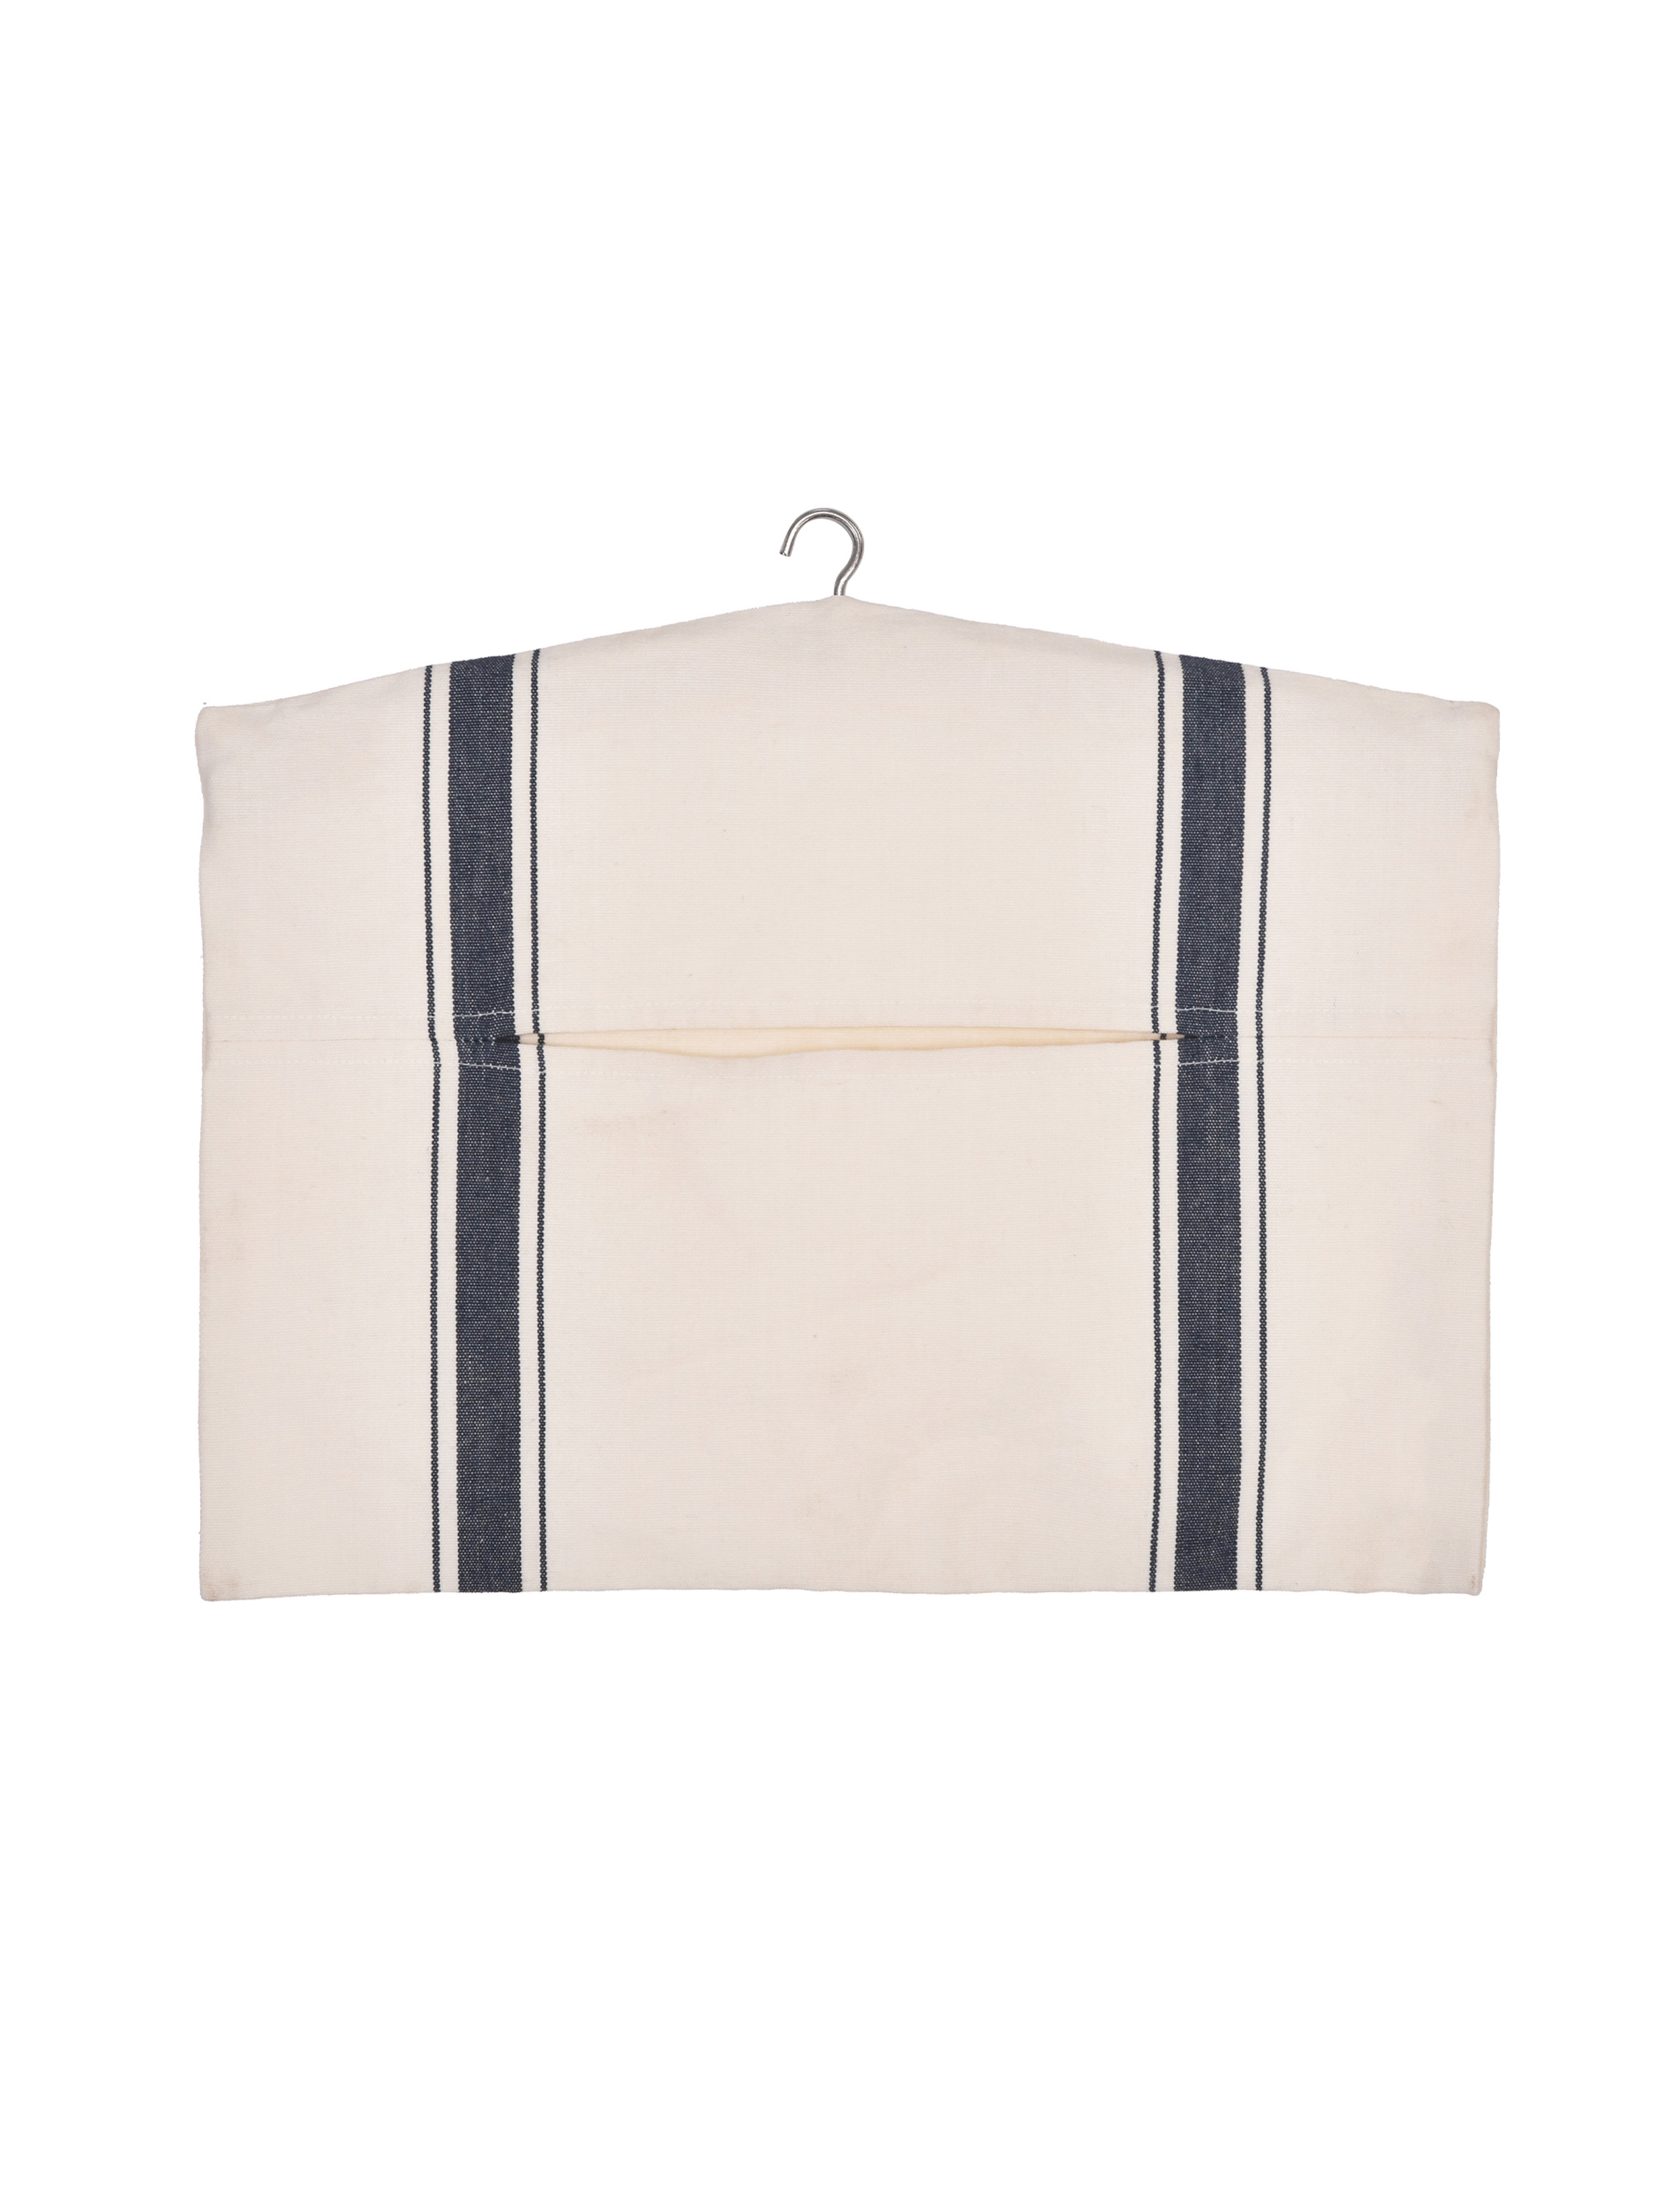 Garden Trading White and Blue Ink Cotton Striped Peg Bag